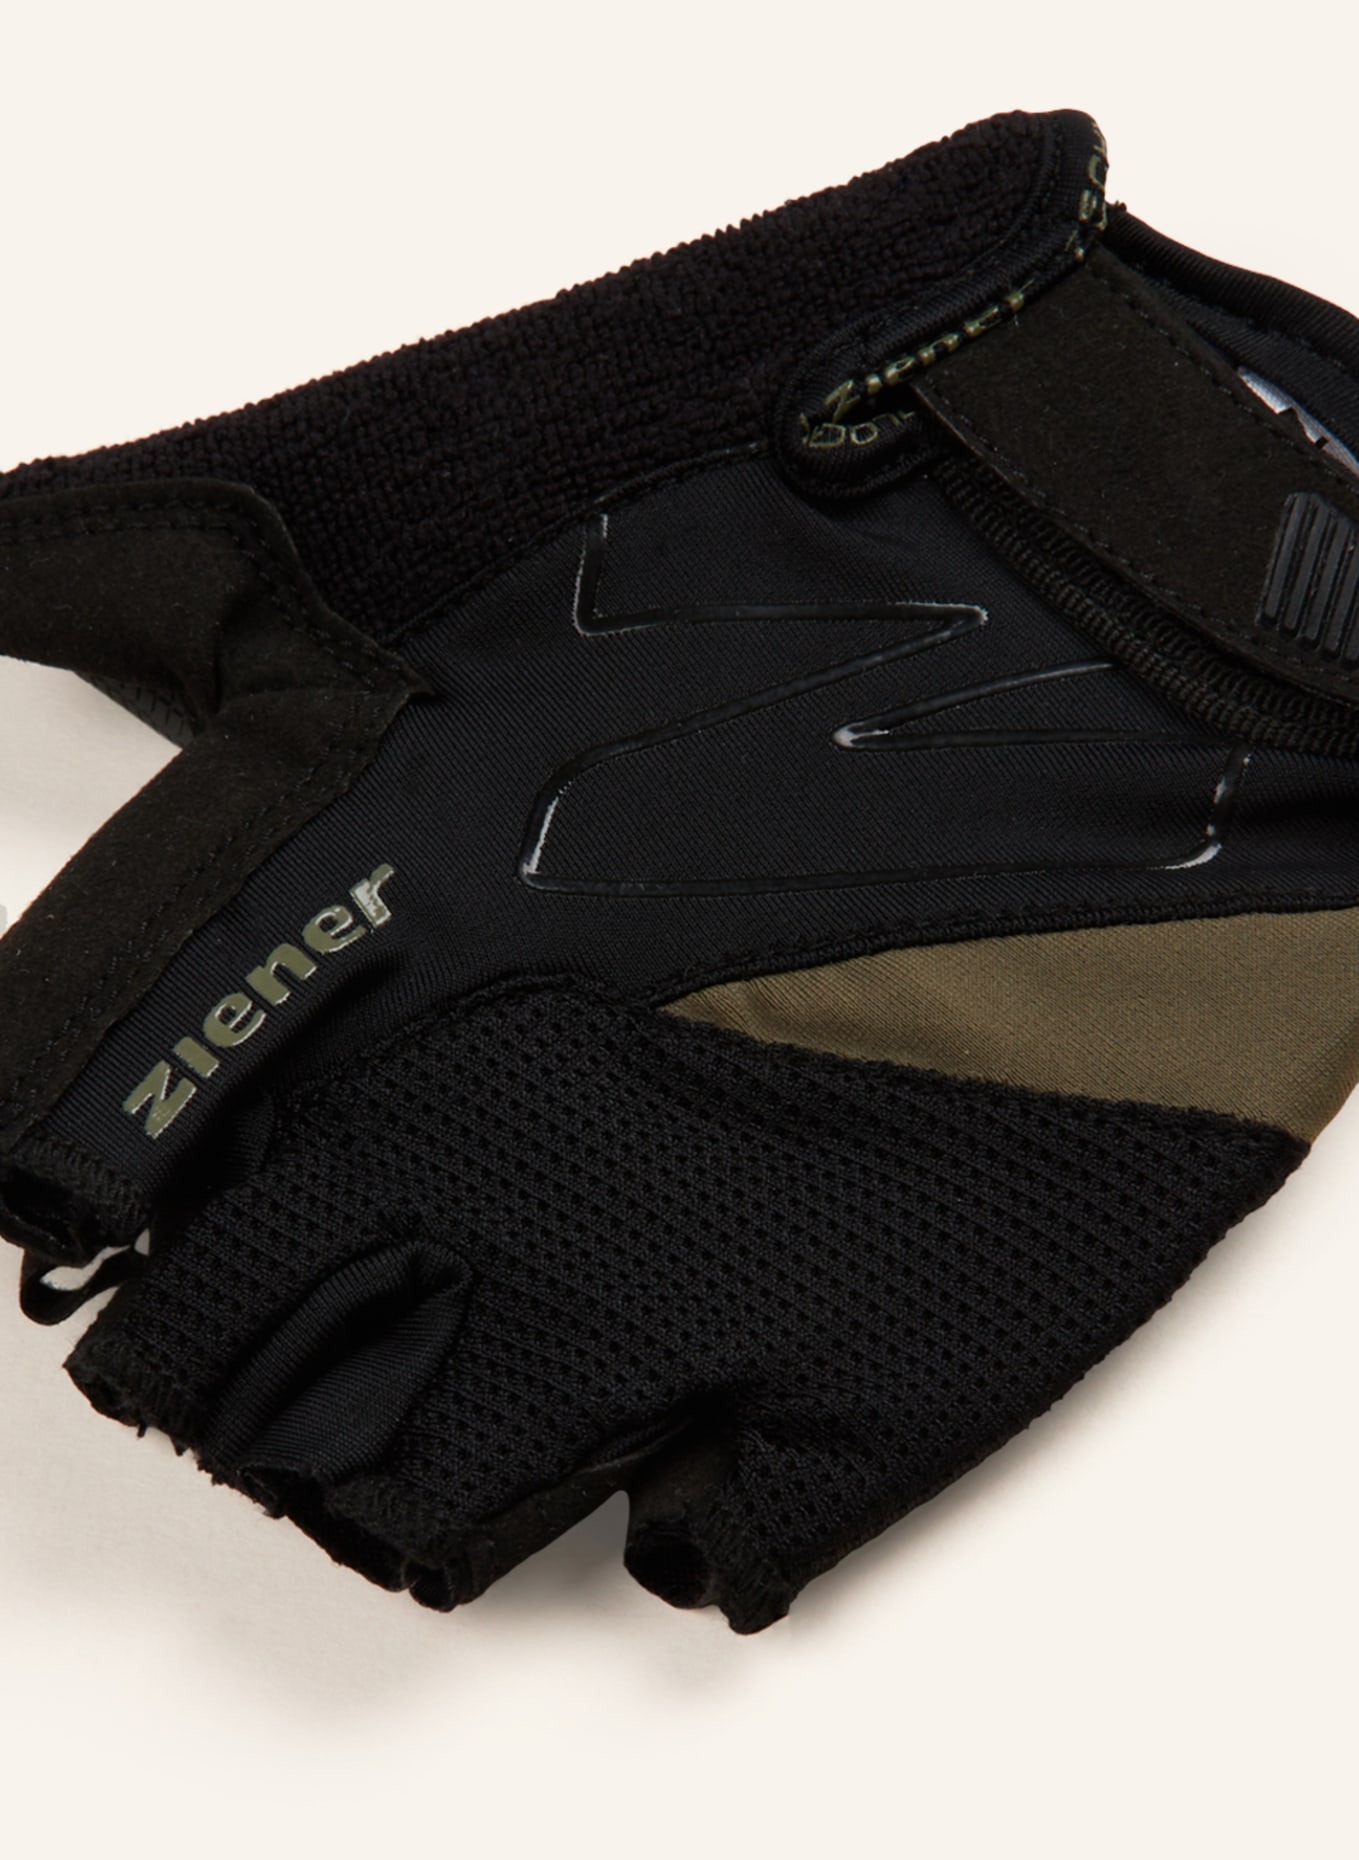 ziener Cycling gloves CRAVE in black/ khaki